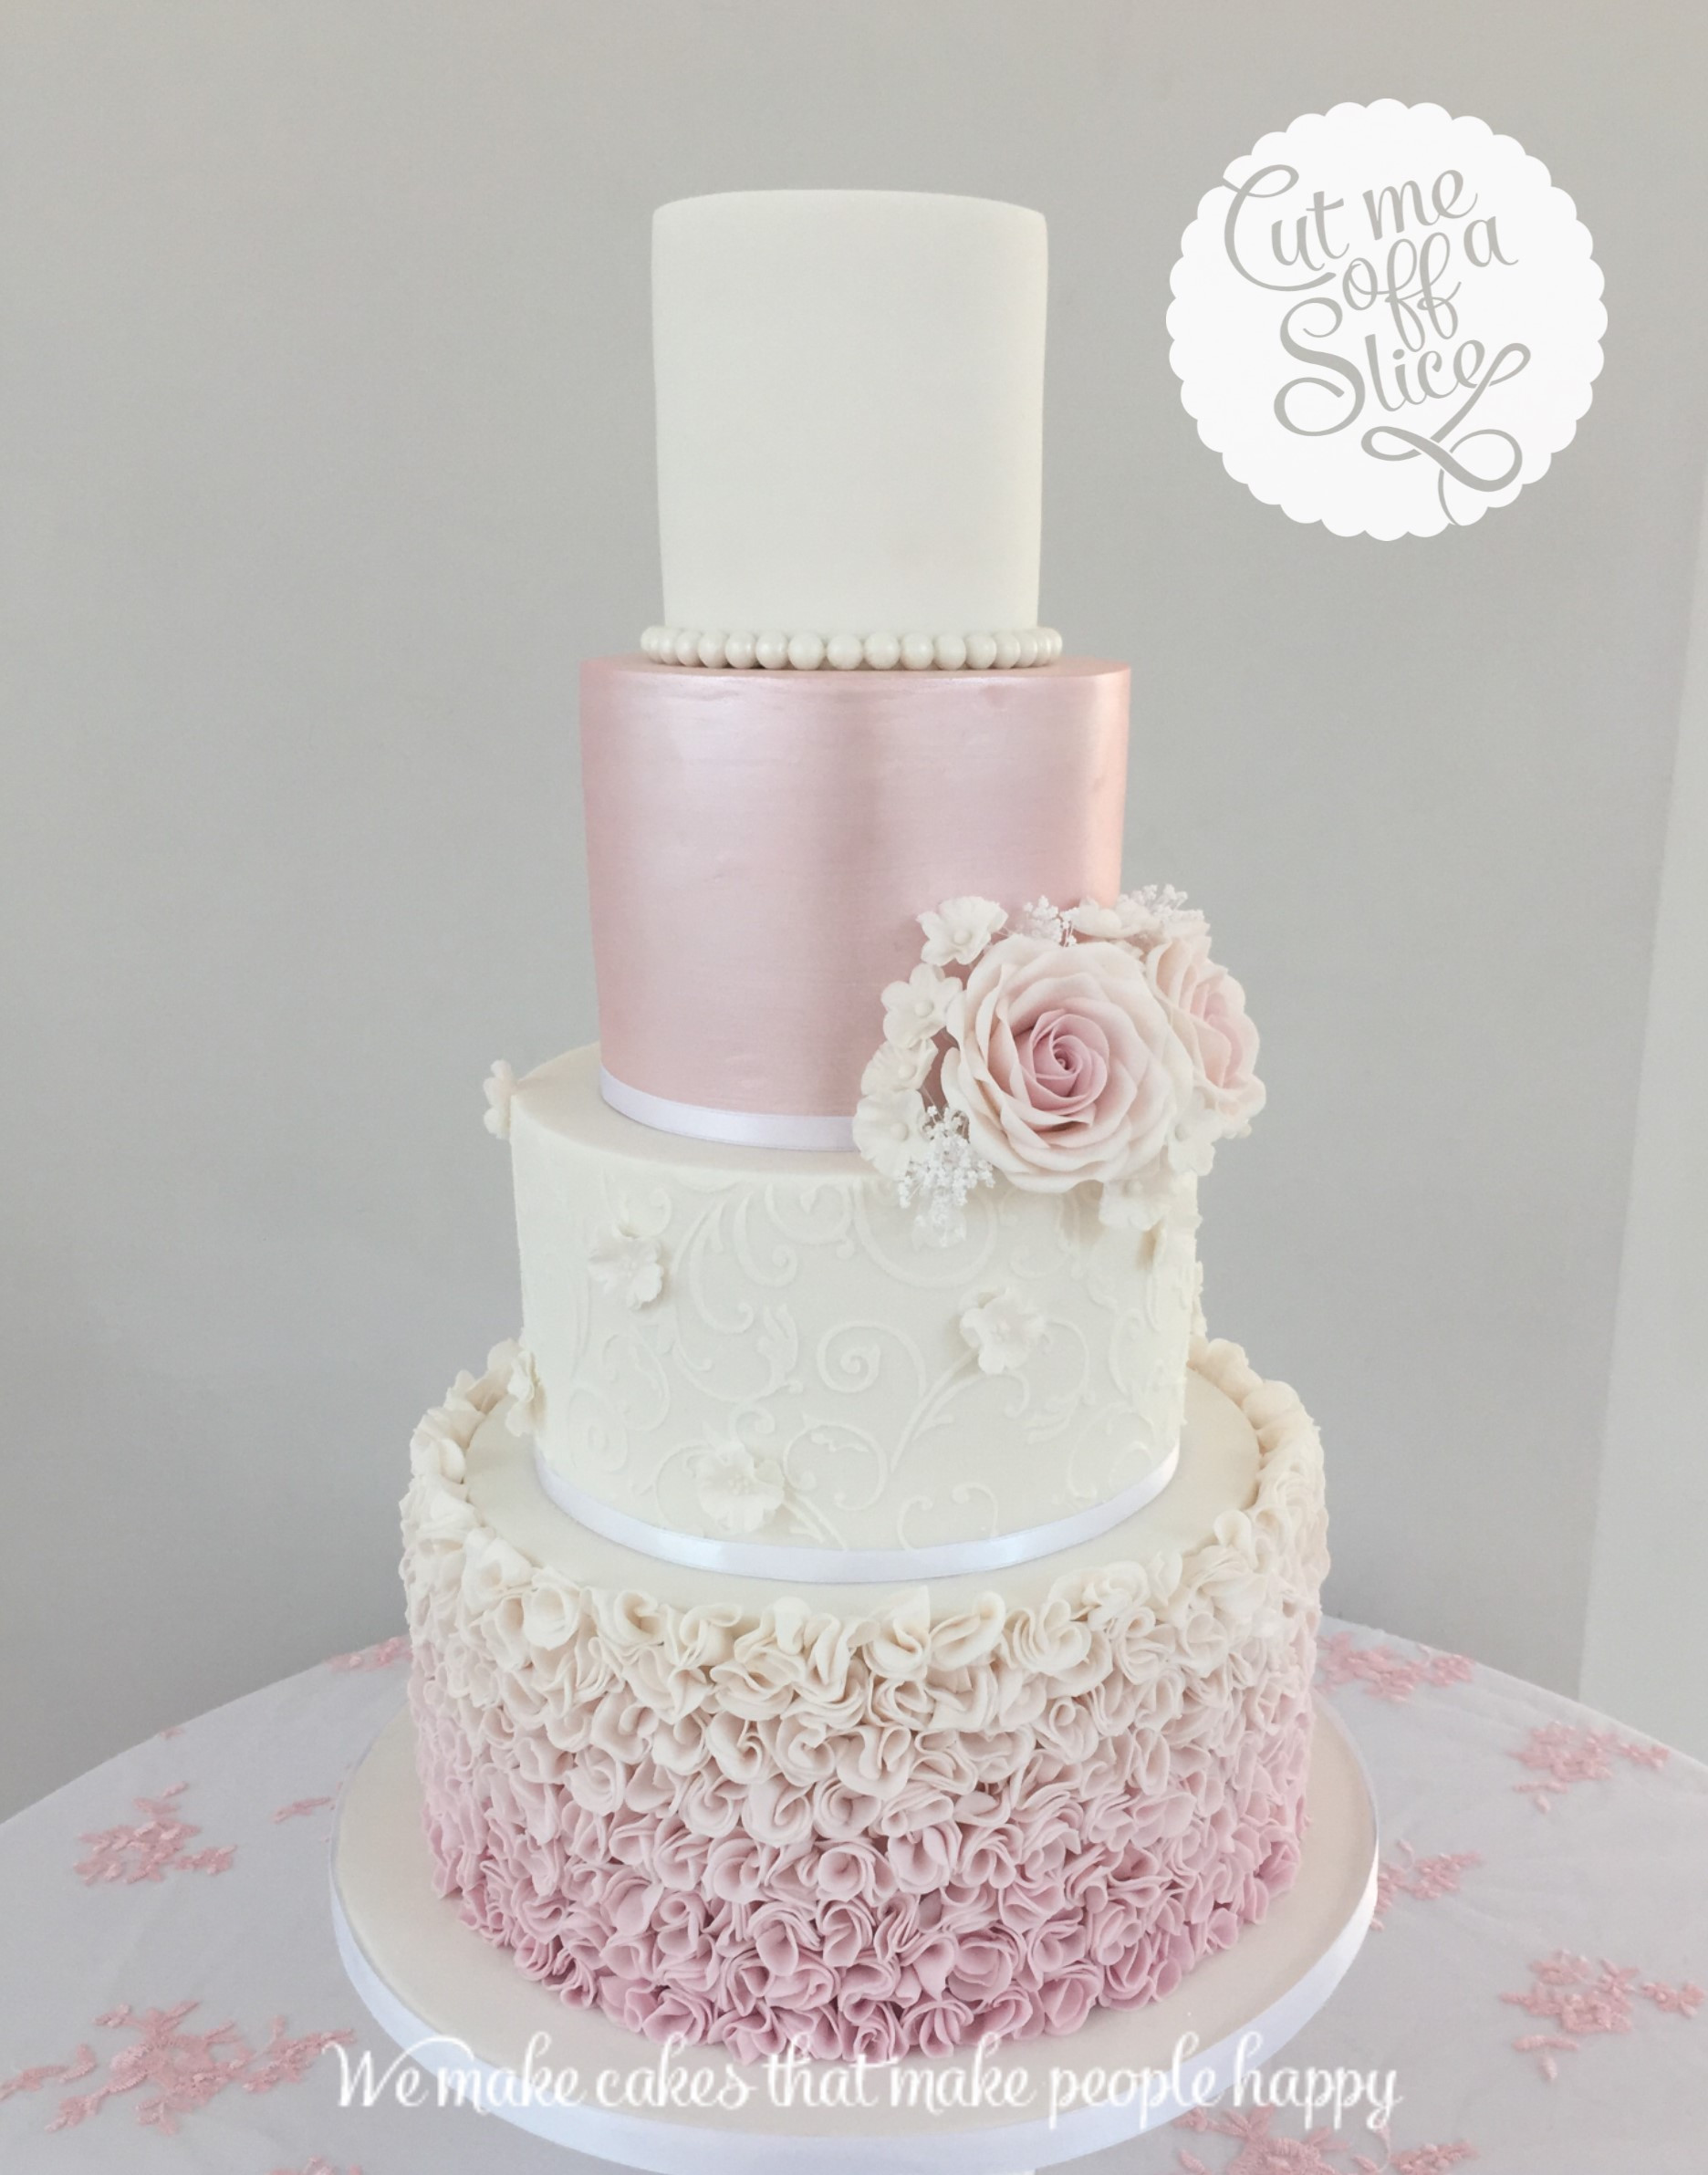 Wedding Cakes Inspiration
 Romantic wedding cake inspiration from cut me off a slice